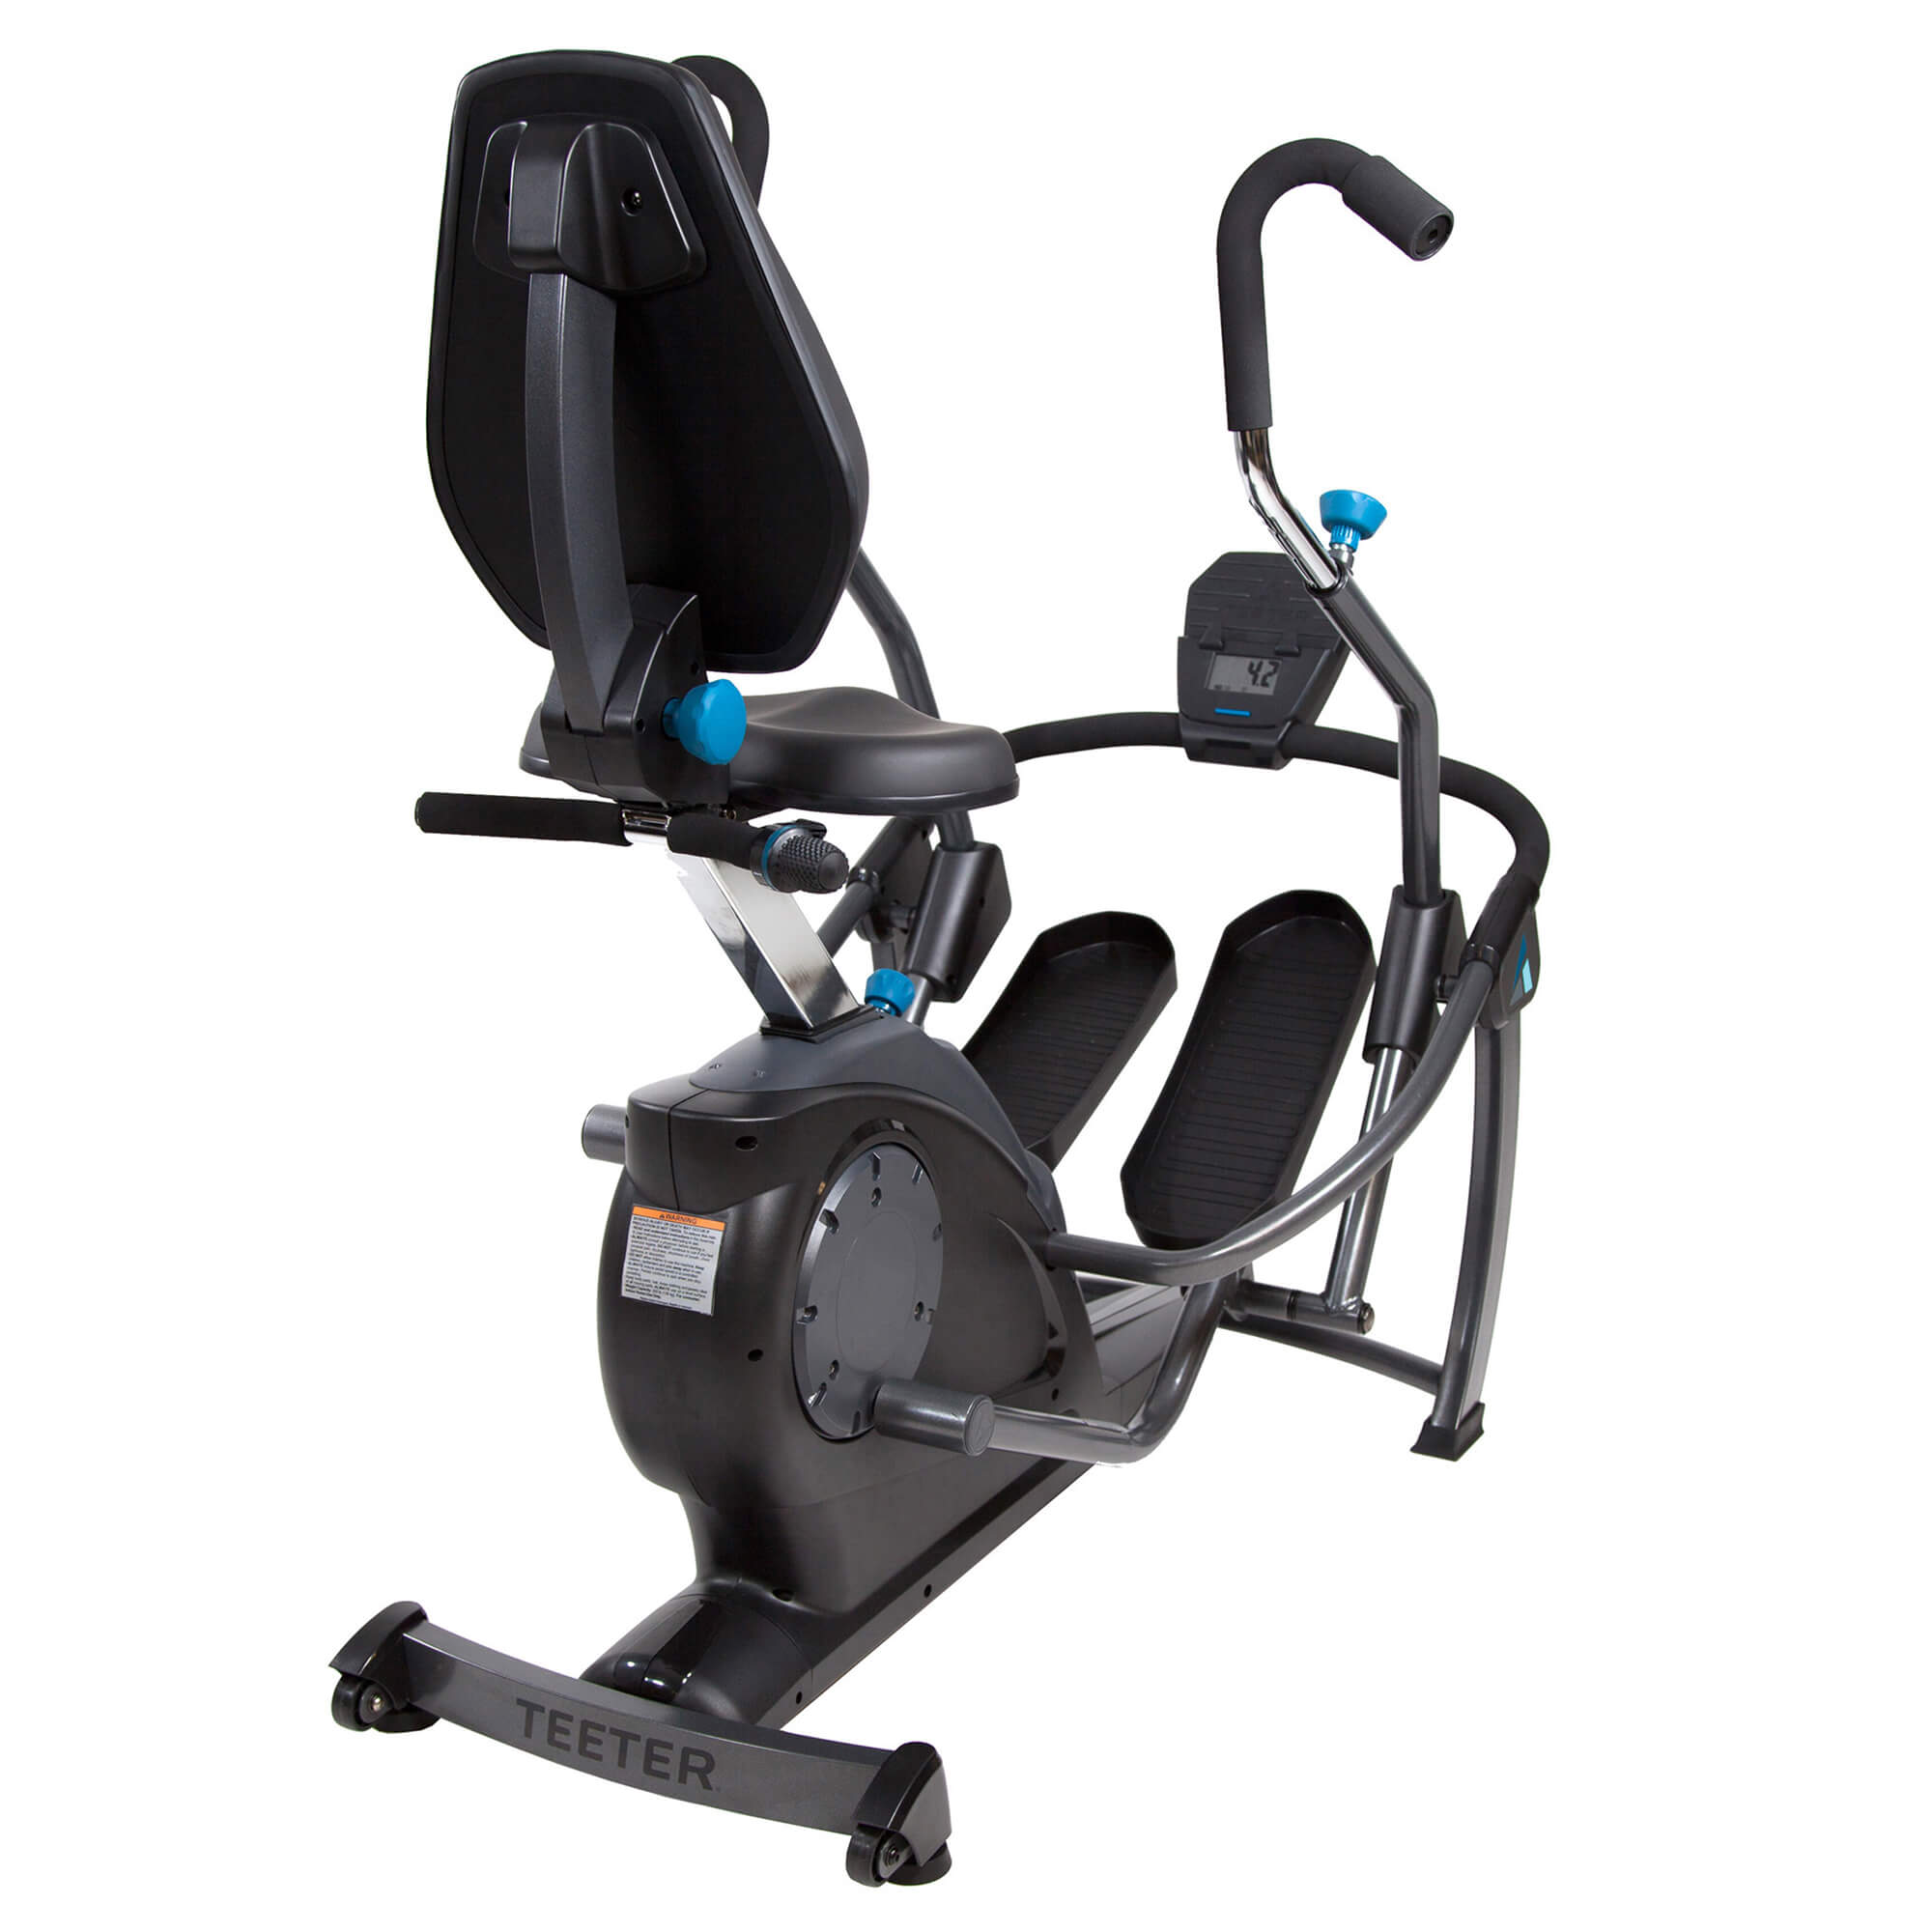 Review of the FreeStep Exercise Bike